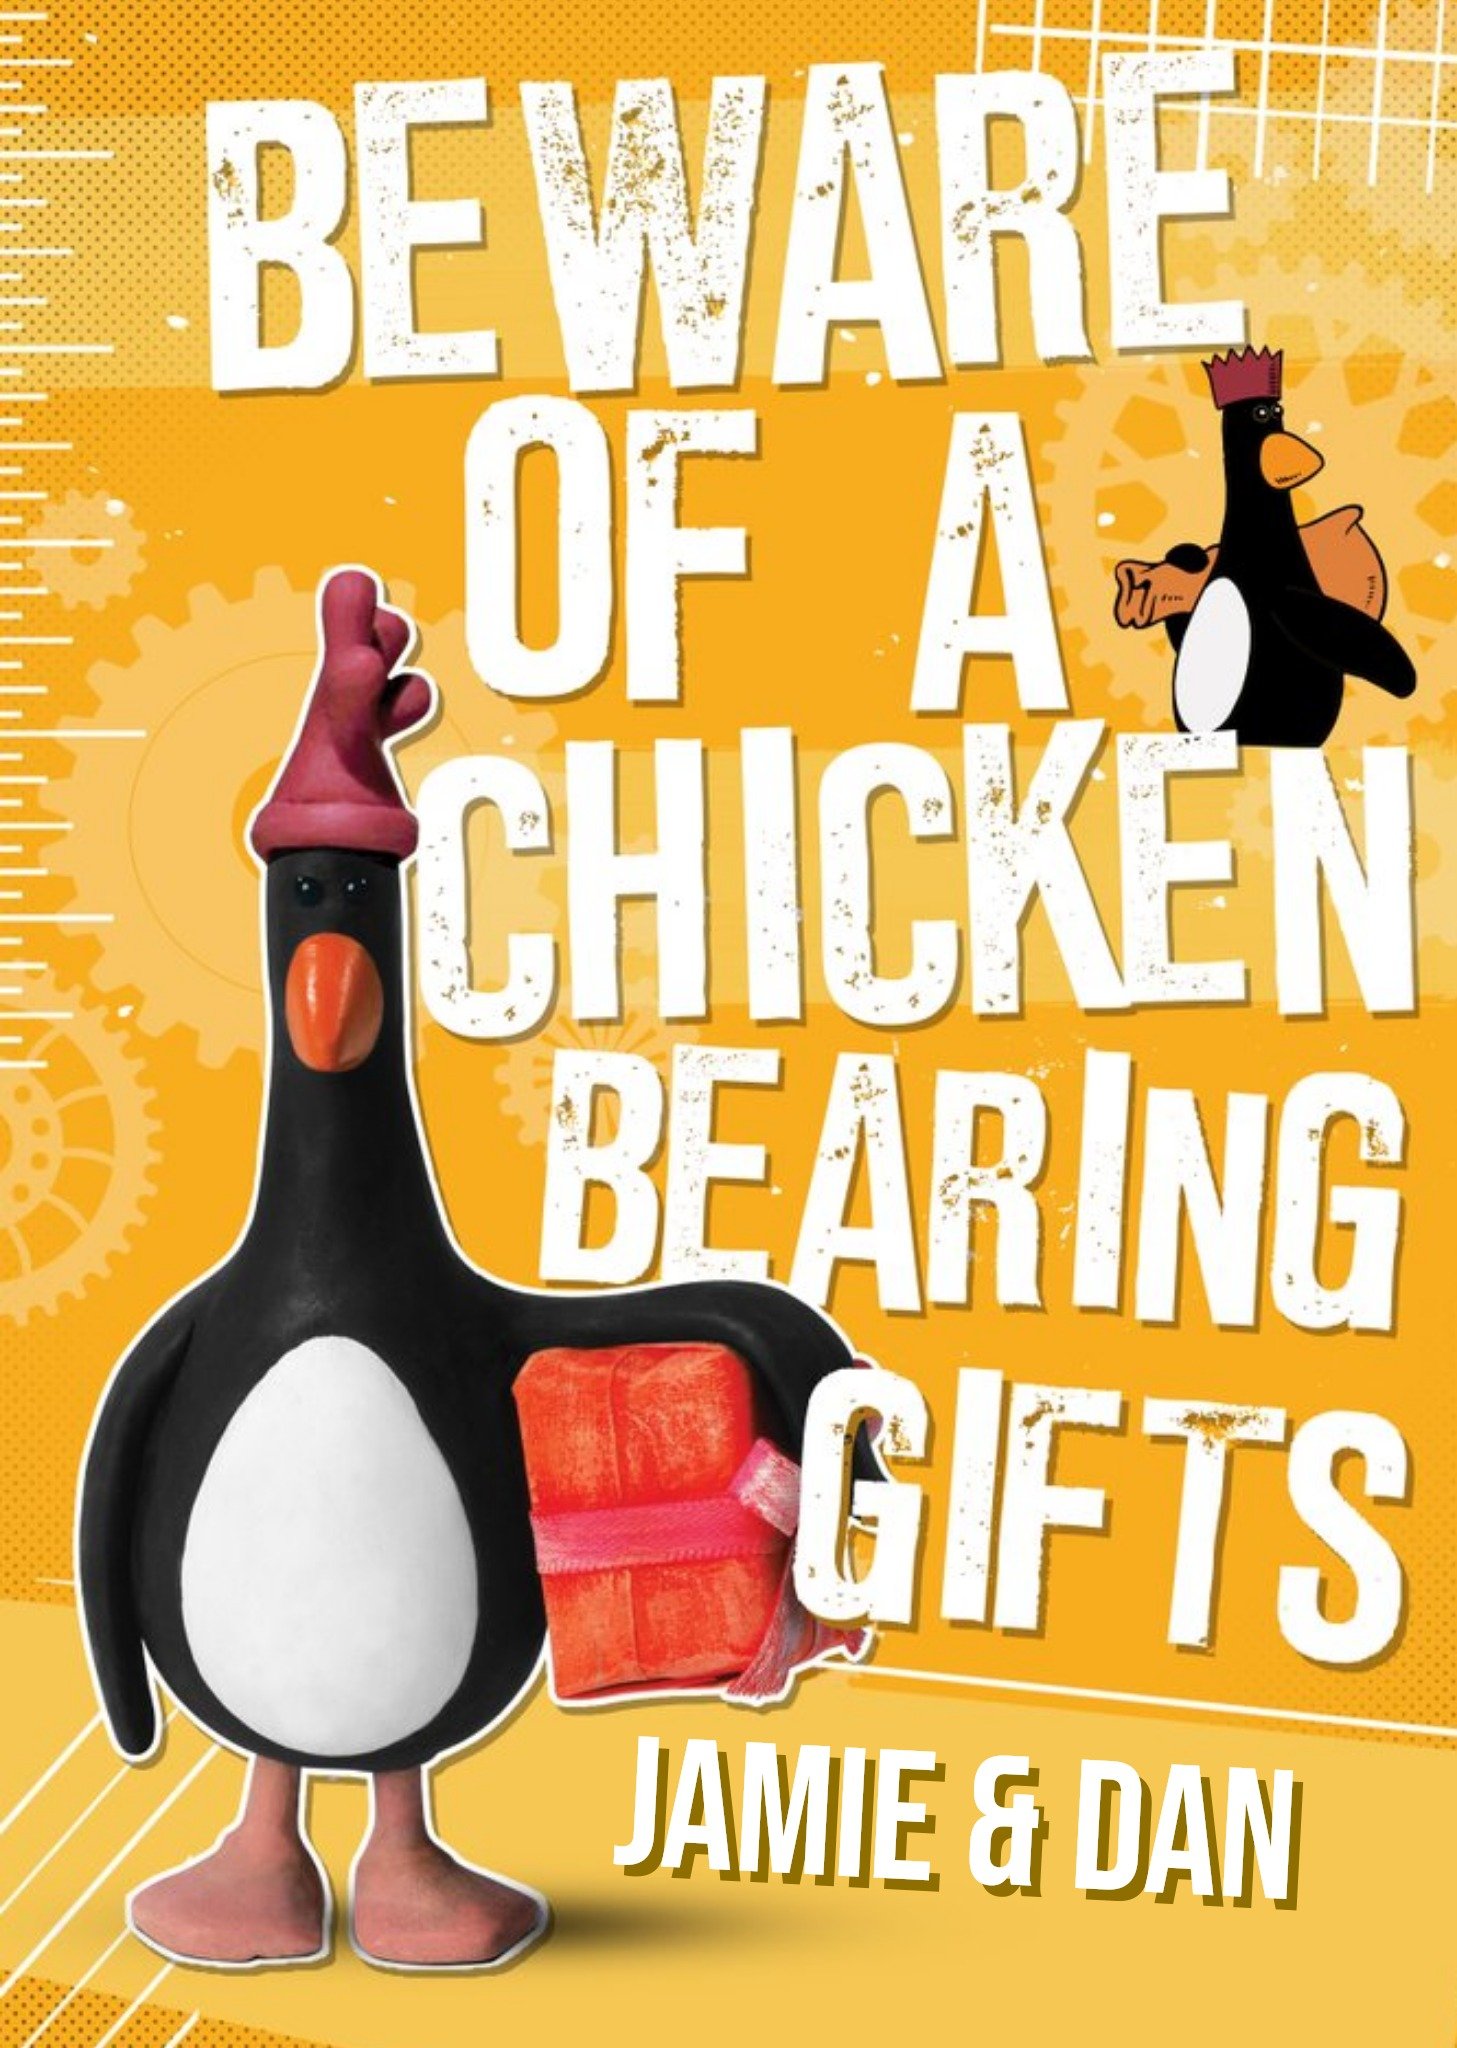 Wallace And Gromit Chicken Bearing Gifts Funny Christmas Card Ecard